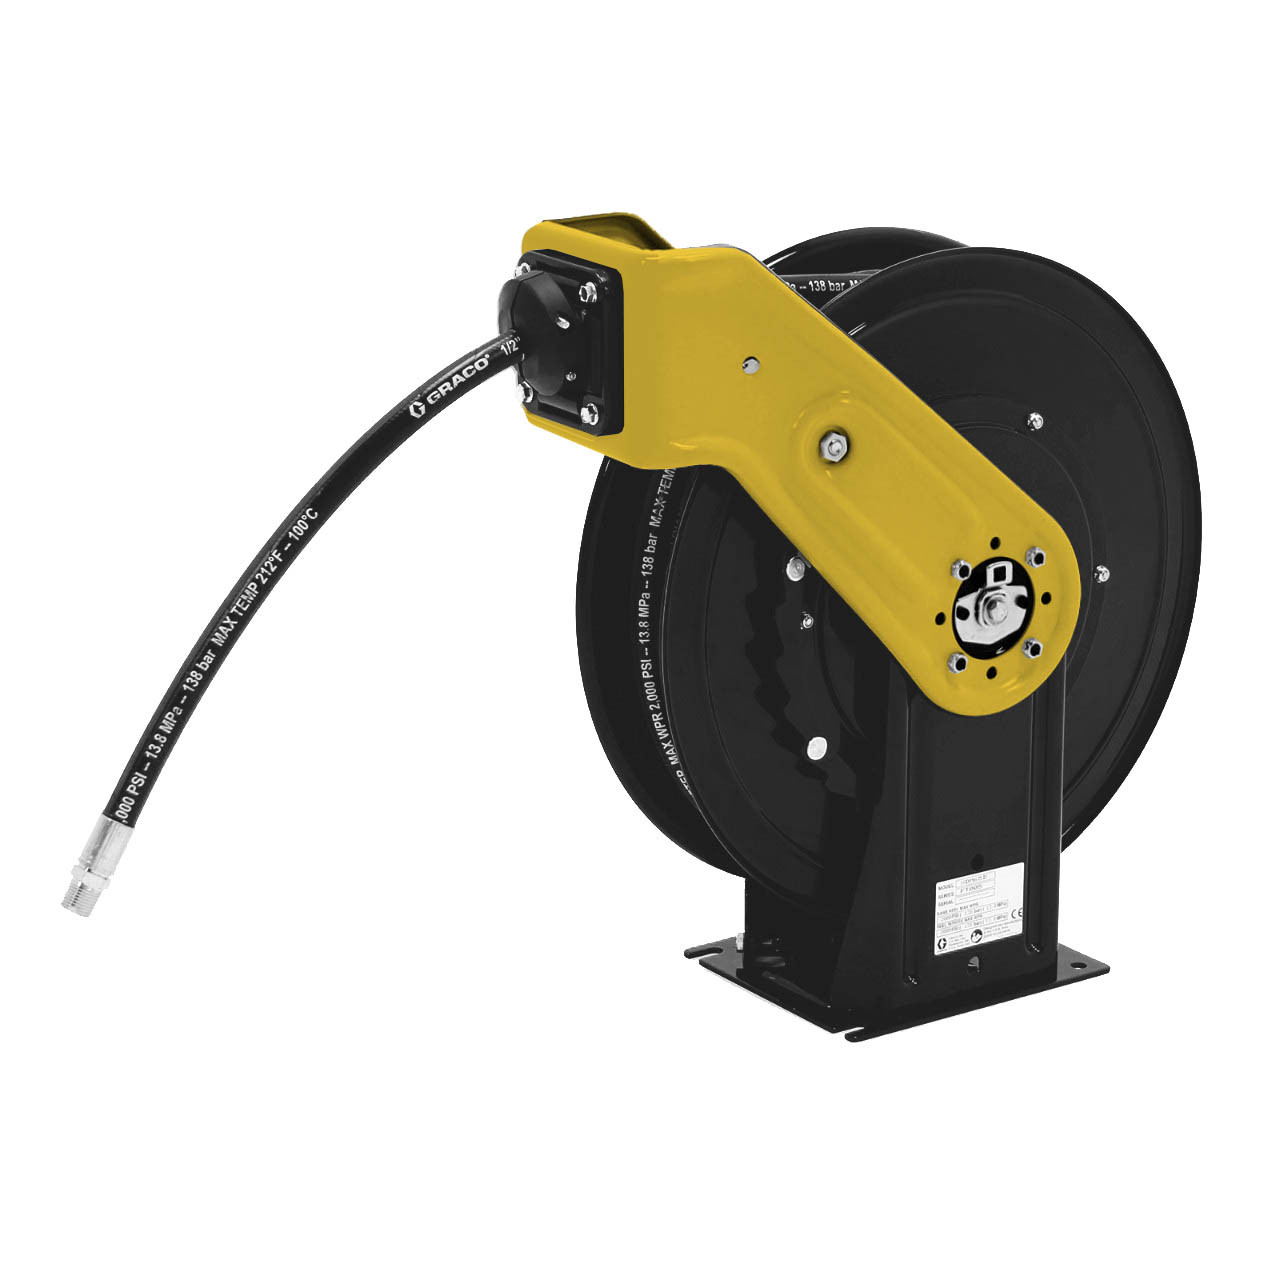 Graco SDL56F - SDX20, 3/8 x 65' Air/Water Hose Reel Overhead Mount, Yellow by FastoolNow